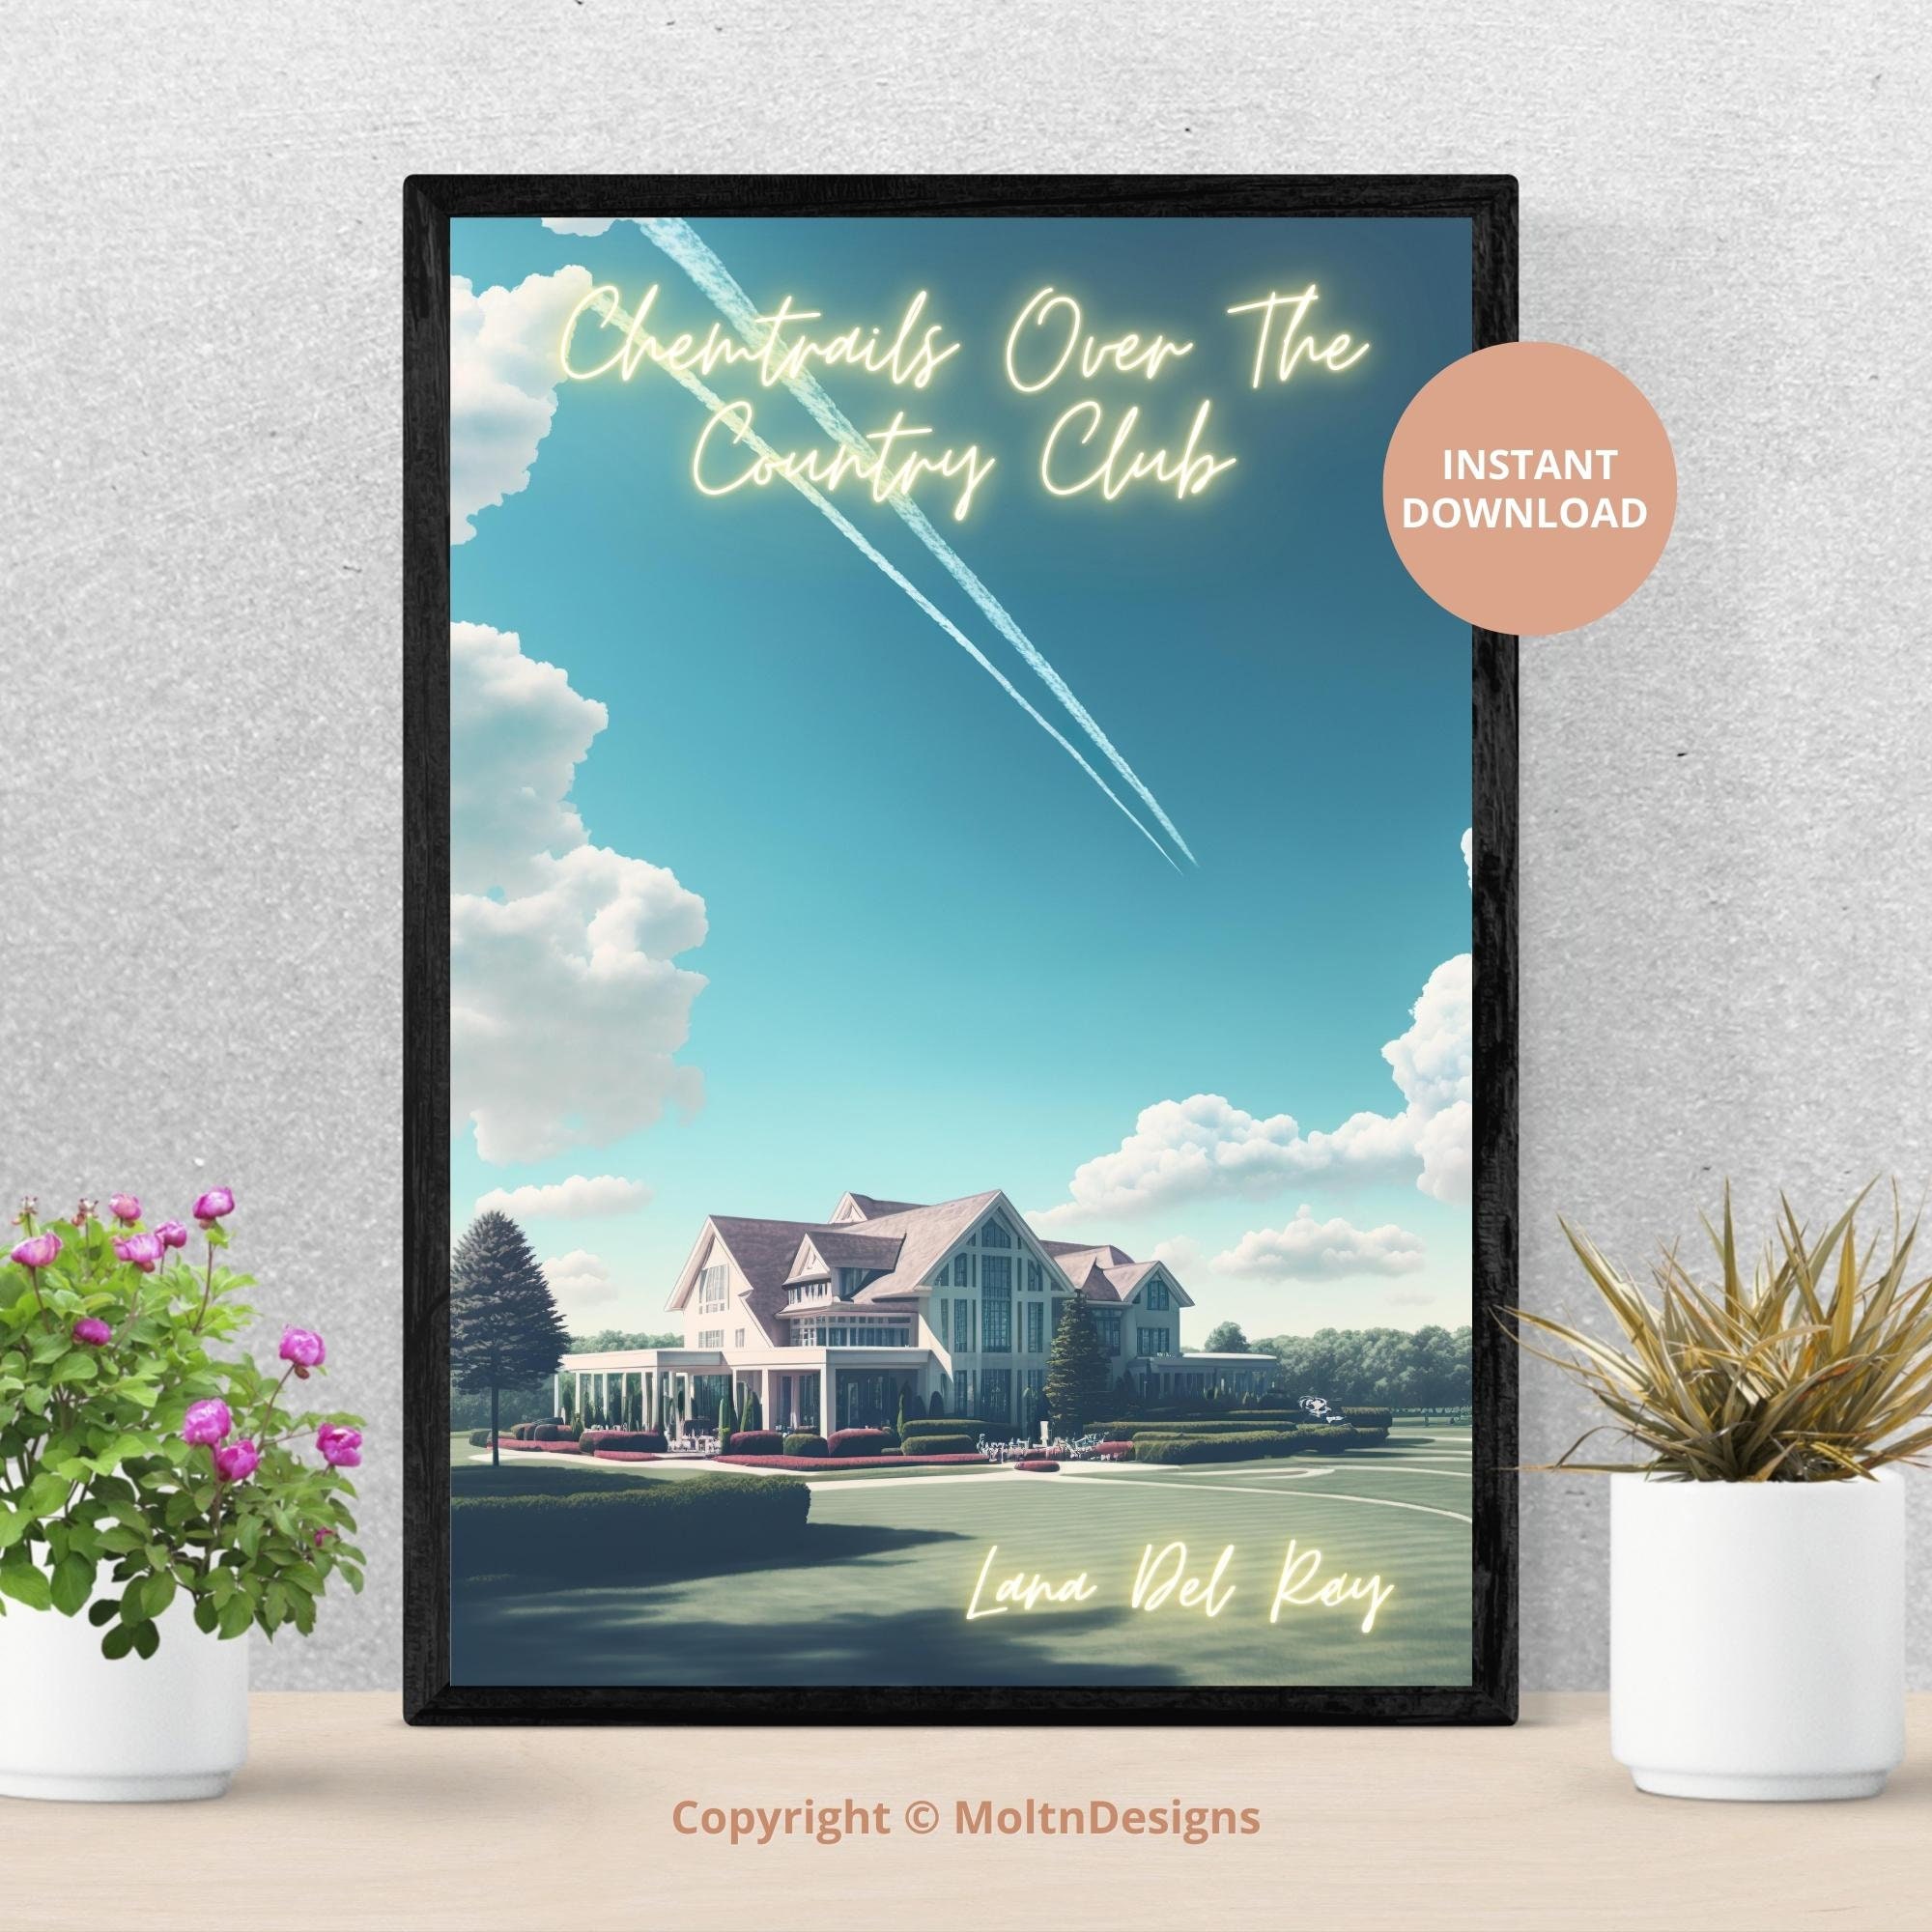 Chemtrails Over The Country Club Poster Lana Del Rey Album - Happy Place  for Music Lovers